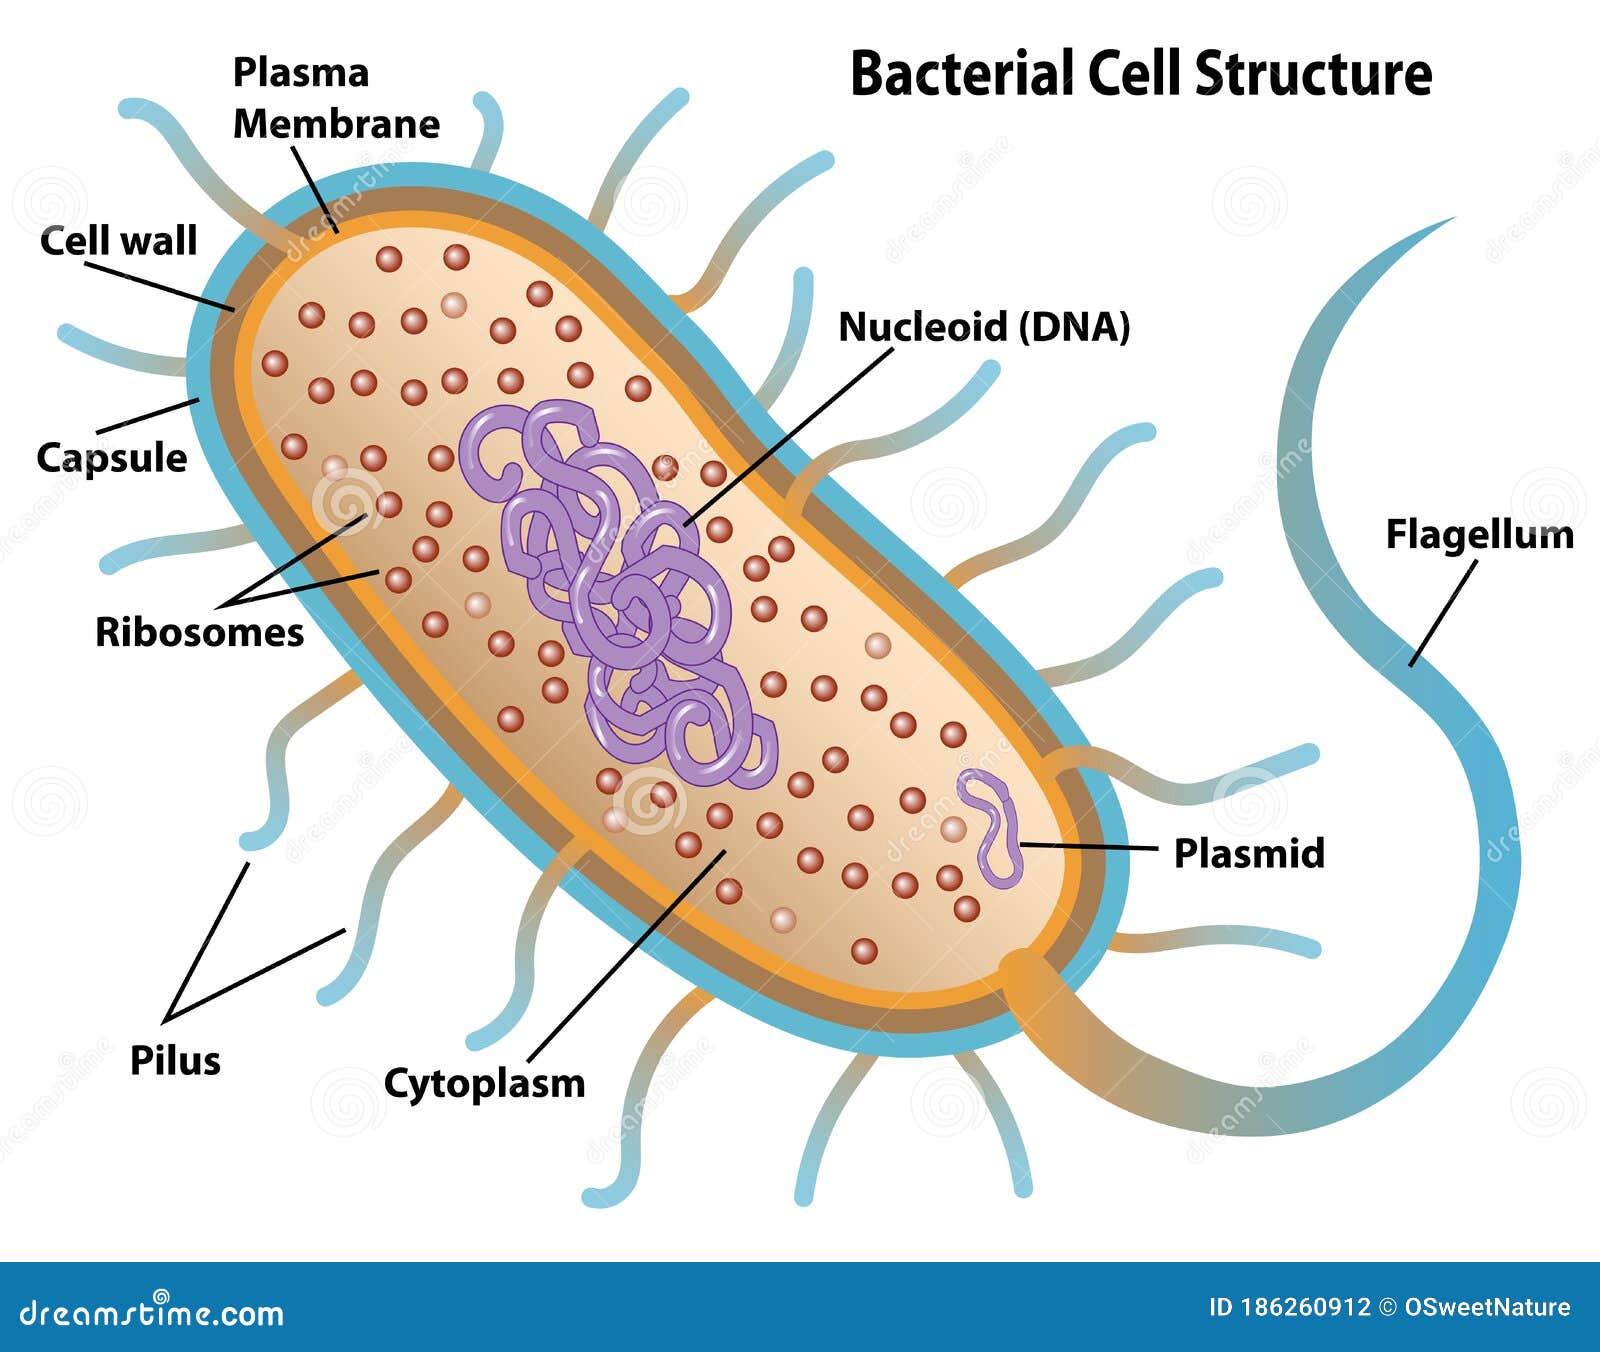 Prokaryotic Cell Structure | Sciencing